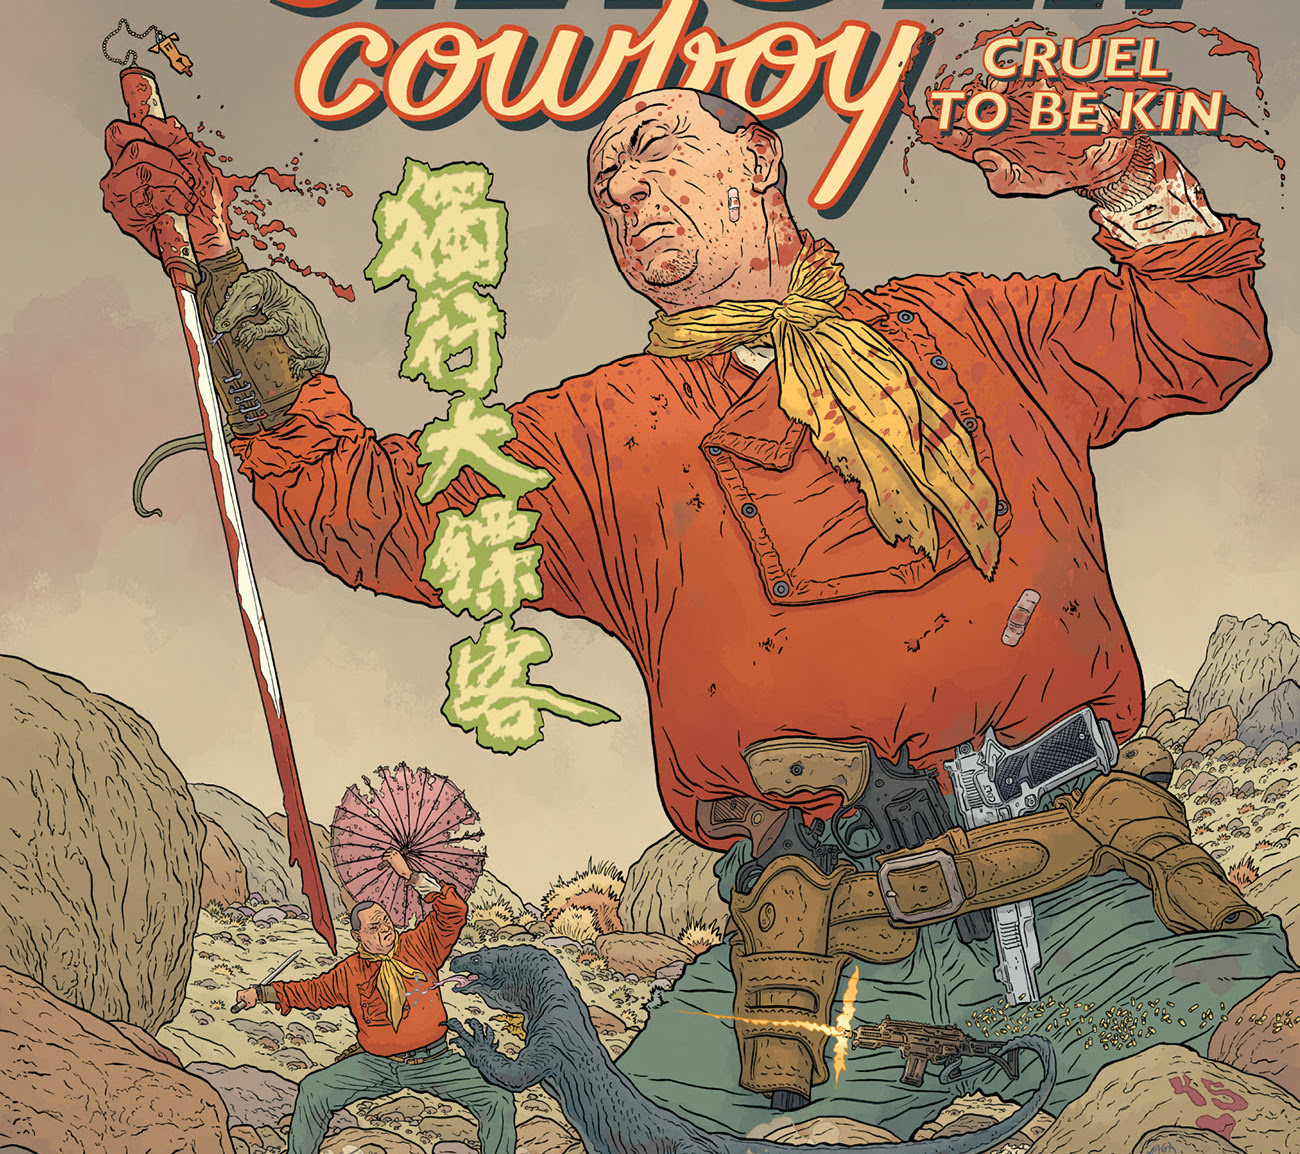 Geof Darrow is back with 'Shaolin Cowboy: Cruel to Be Kin' starting May 28th!